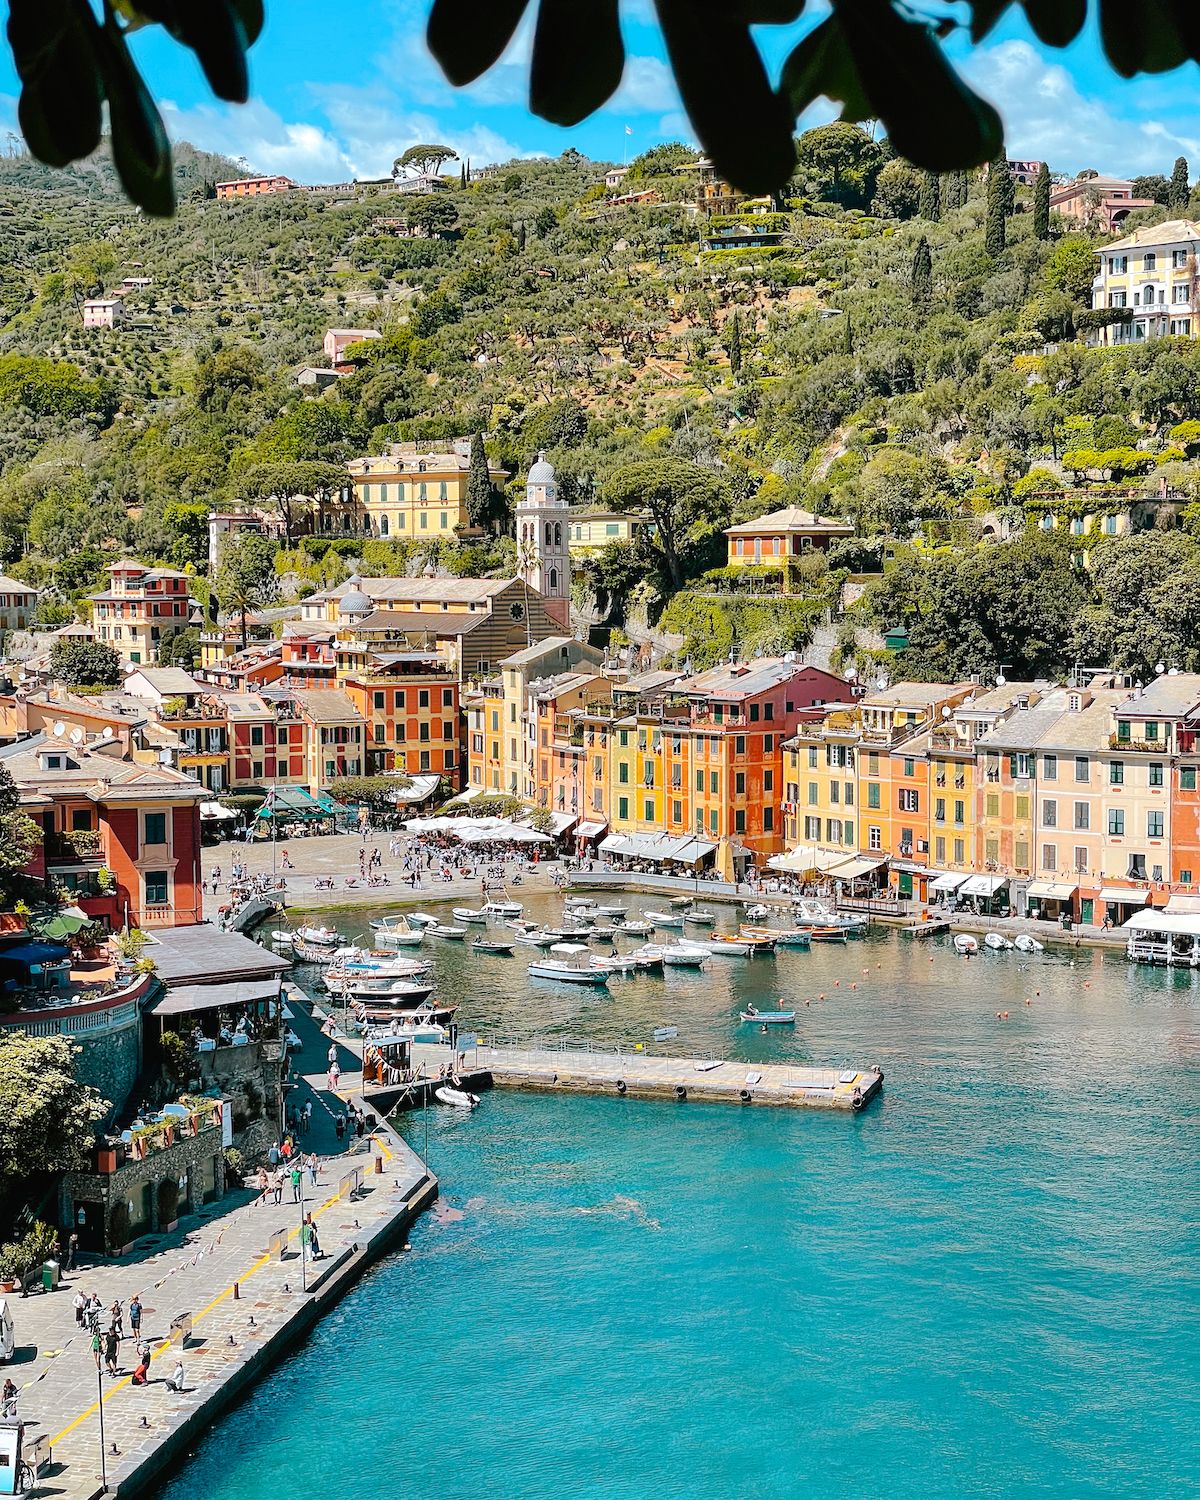 View from up high of Portofino's turquoise waterfront, boats and pastel orange, yellow and peach buildings